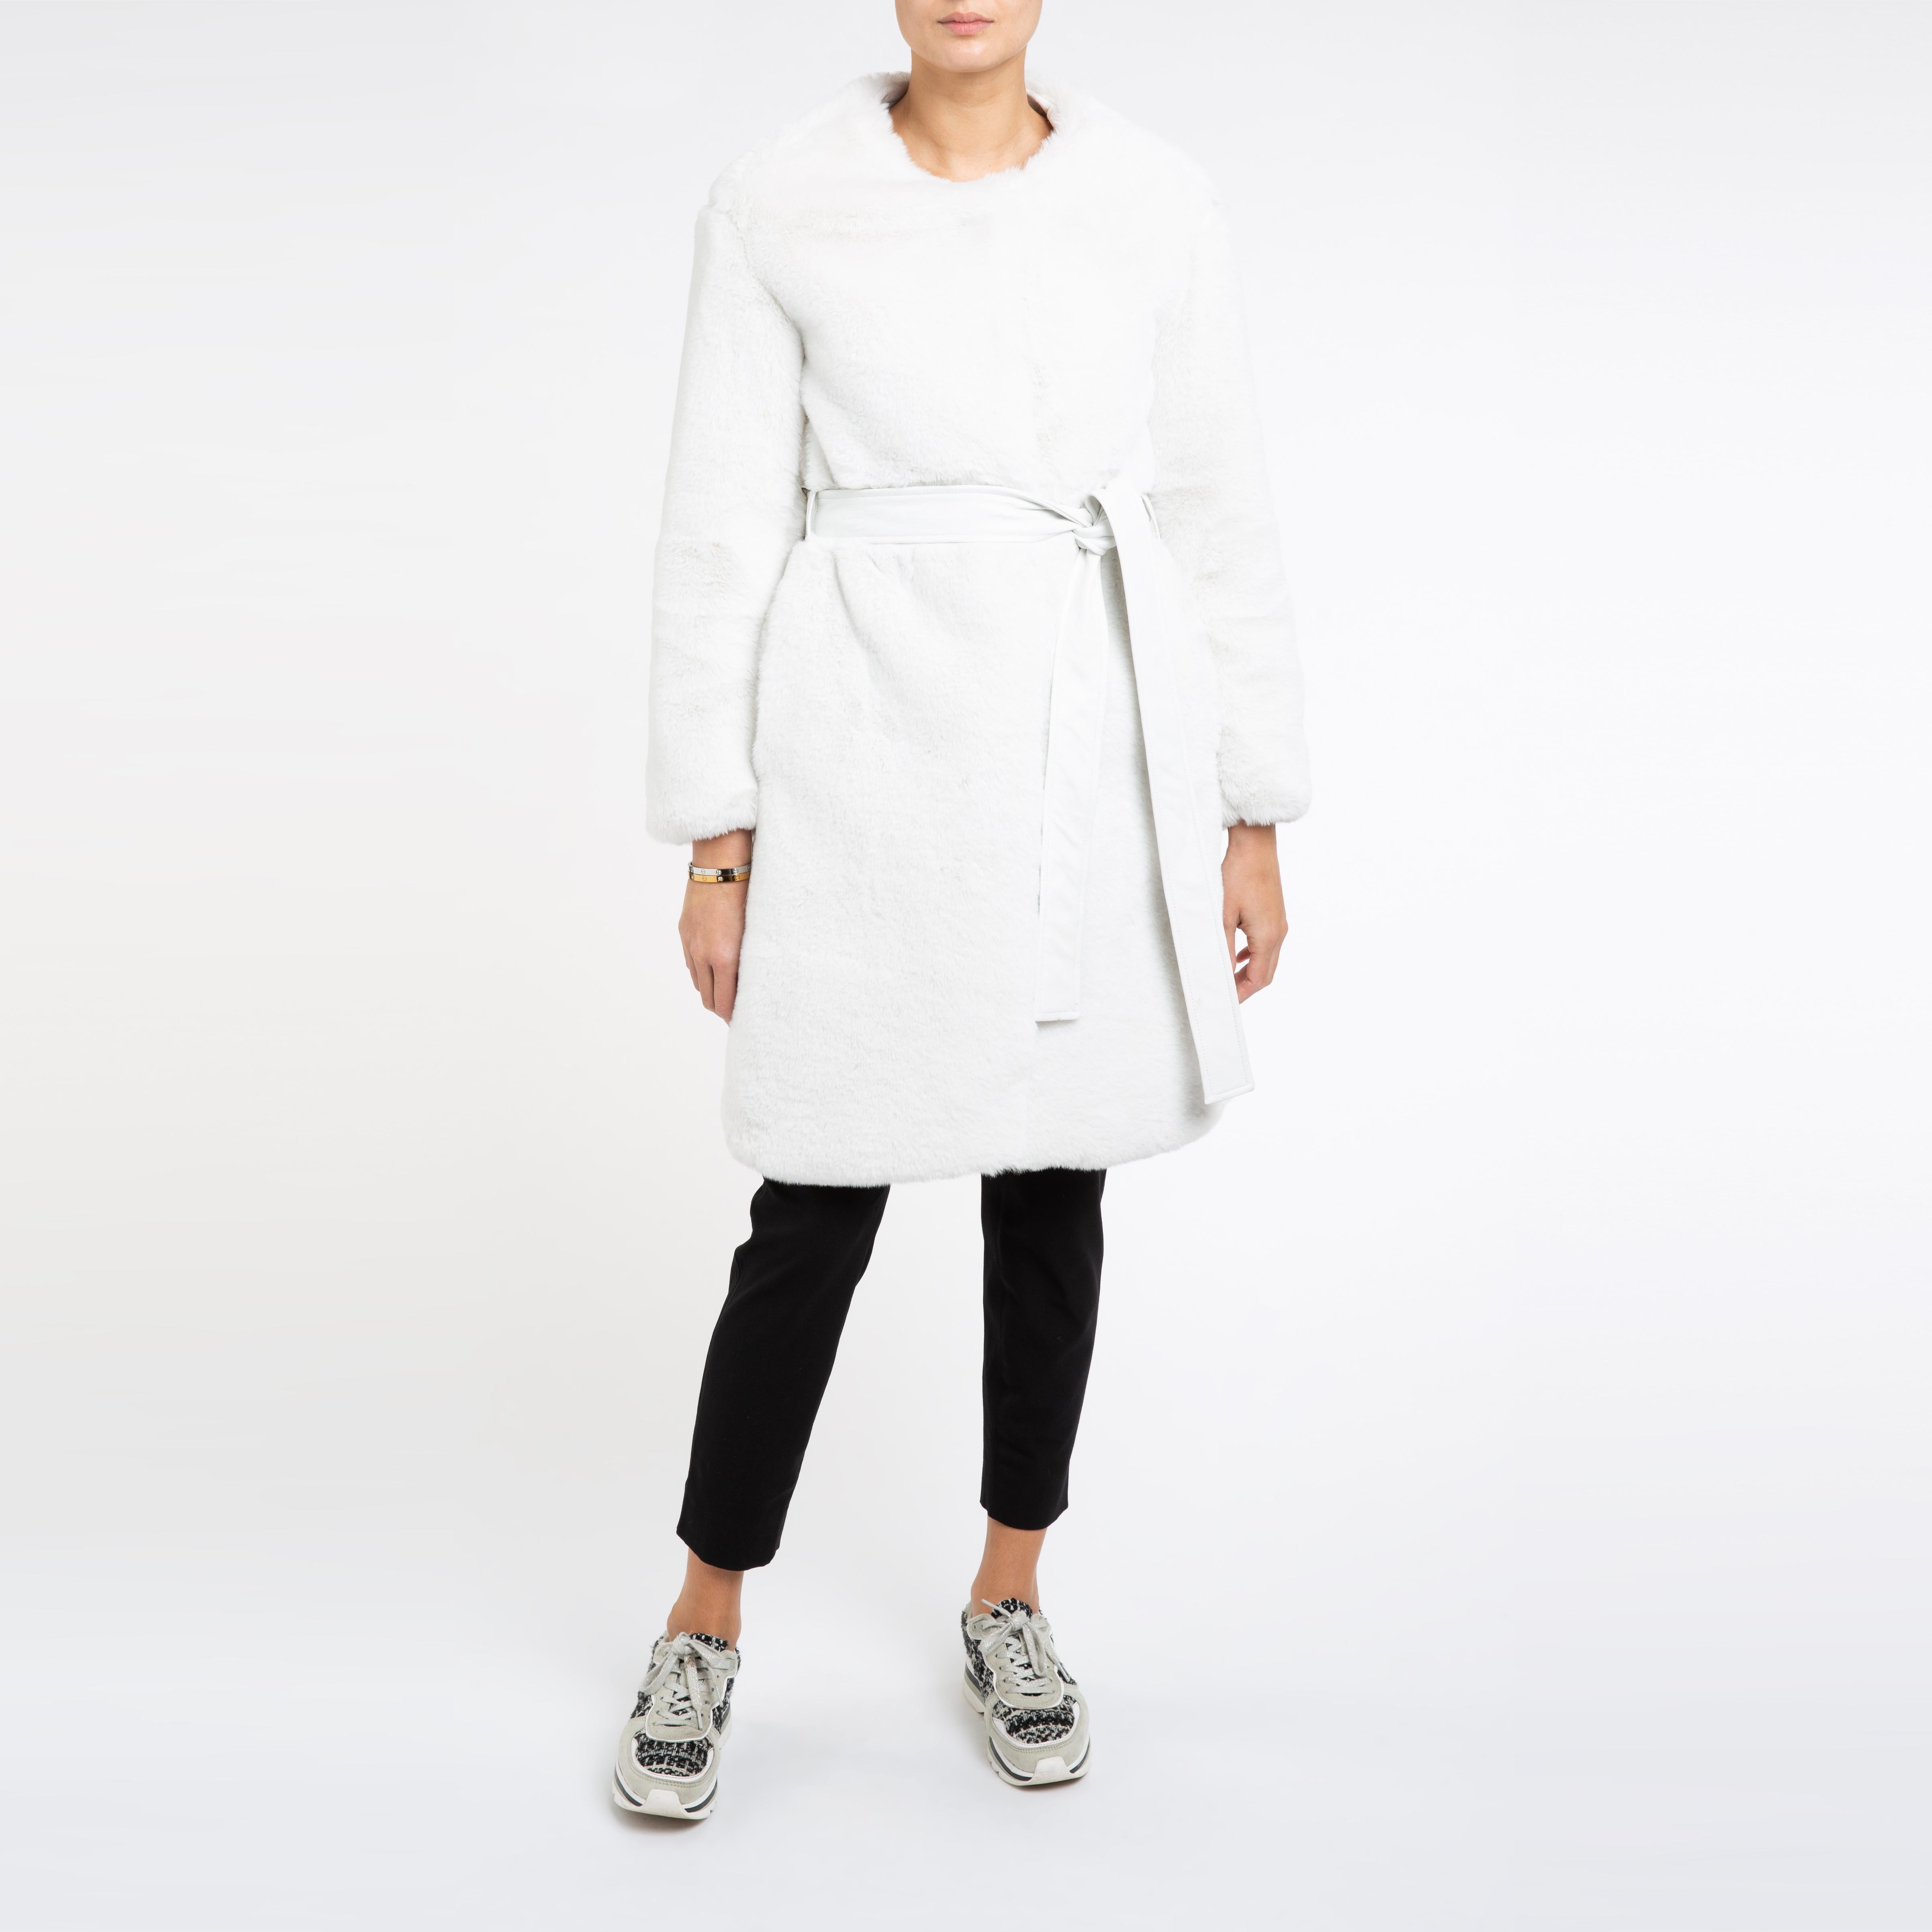 Verheyen London Serena  Collarless Faux Fur Coat in White - Size uk 6

Handmade in London, made with the highest quality faux fur on the market - you wouldn't even know it was fake, its that good. This luxury item is an investment piece to wear for